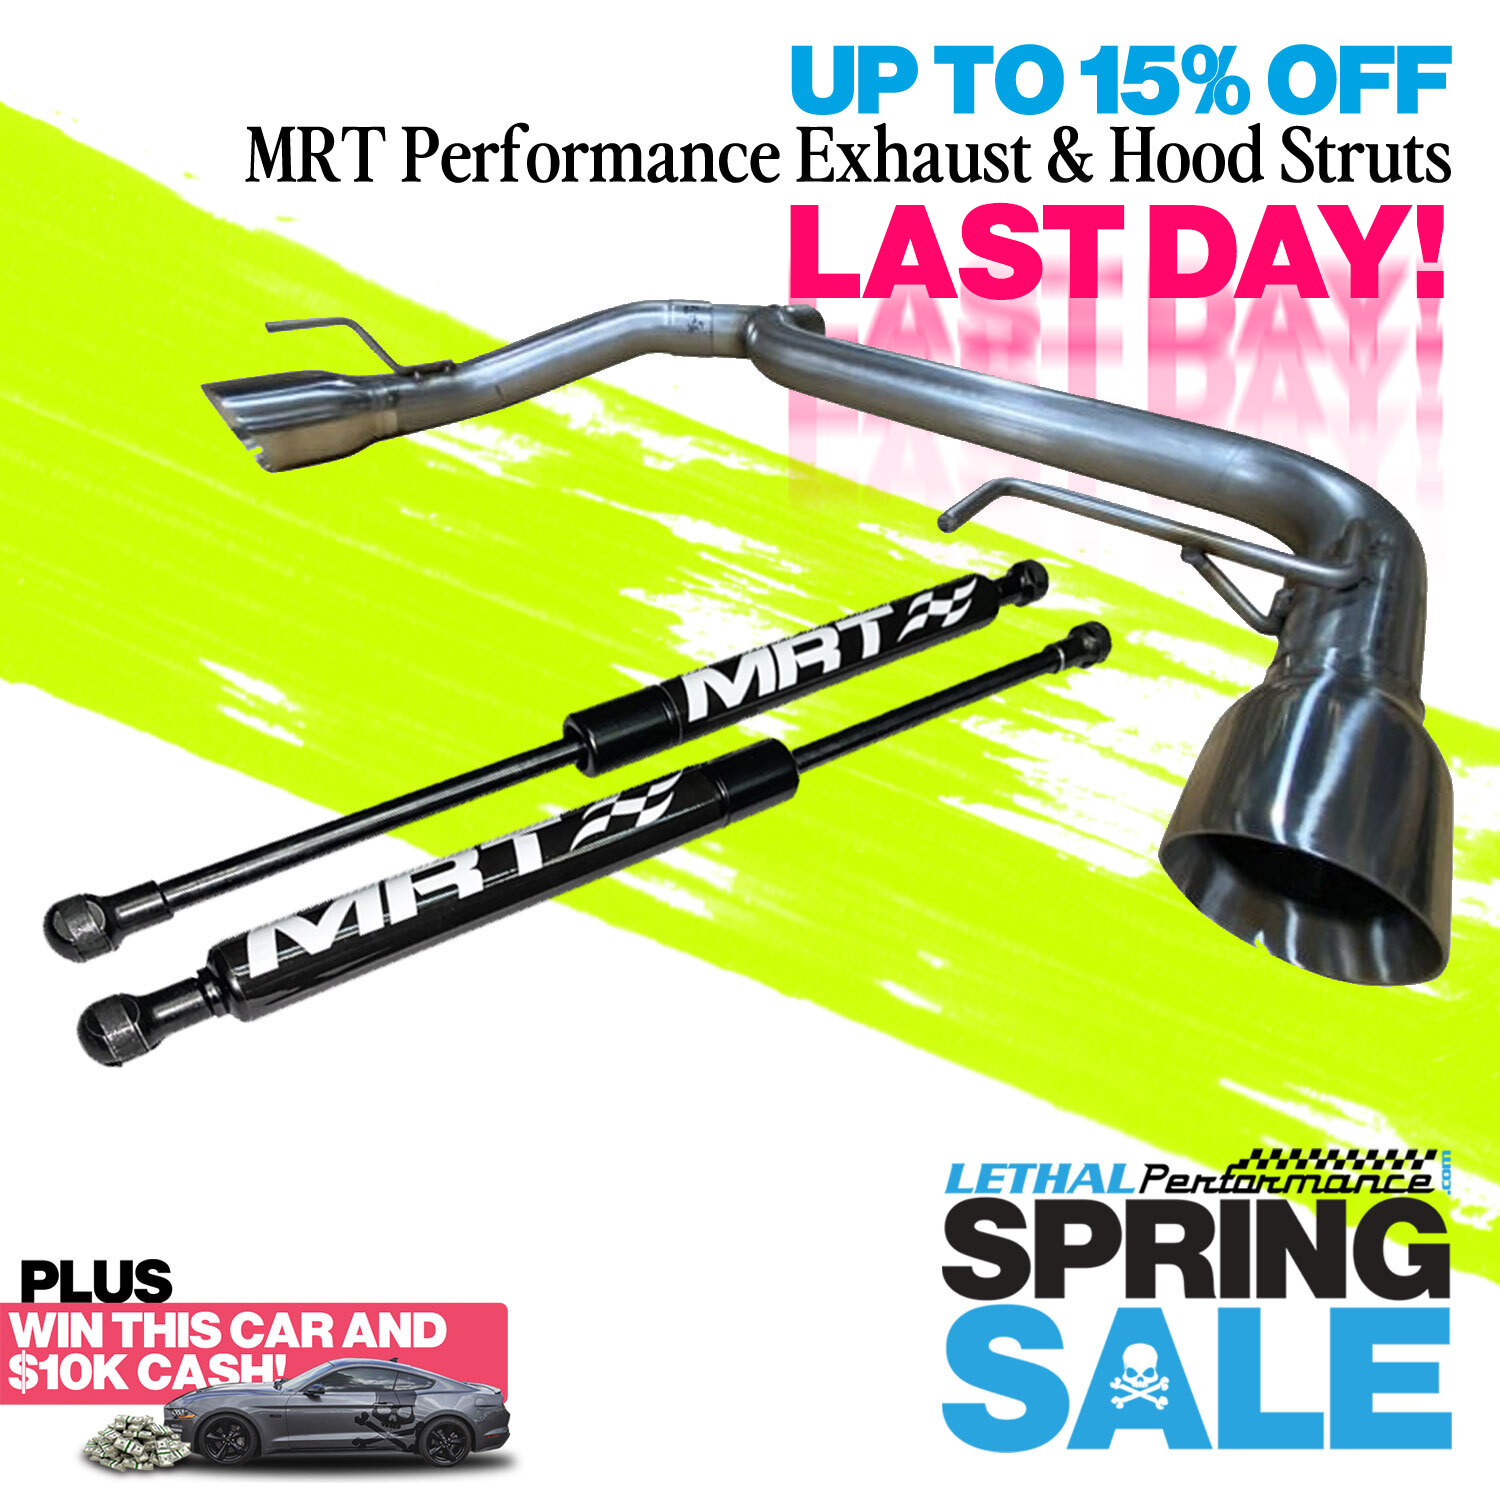 Ford Bronco Spring SALE has SPRUNG here at Lethal Performance!! last day mrt spring sale